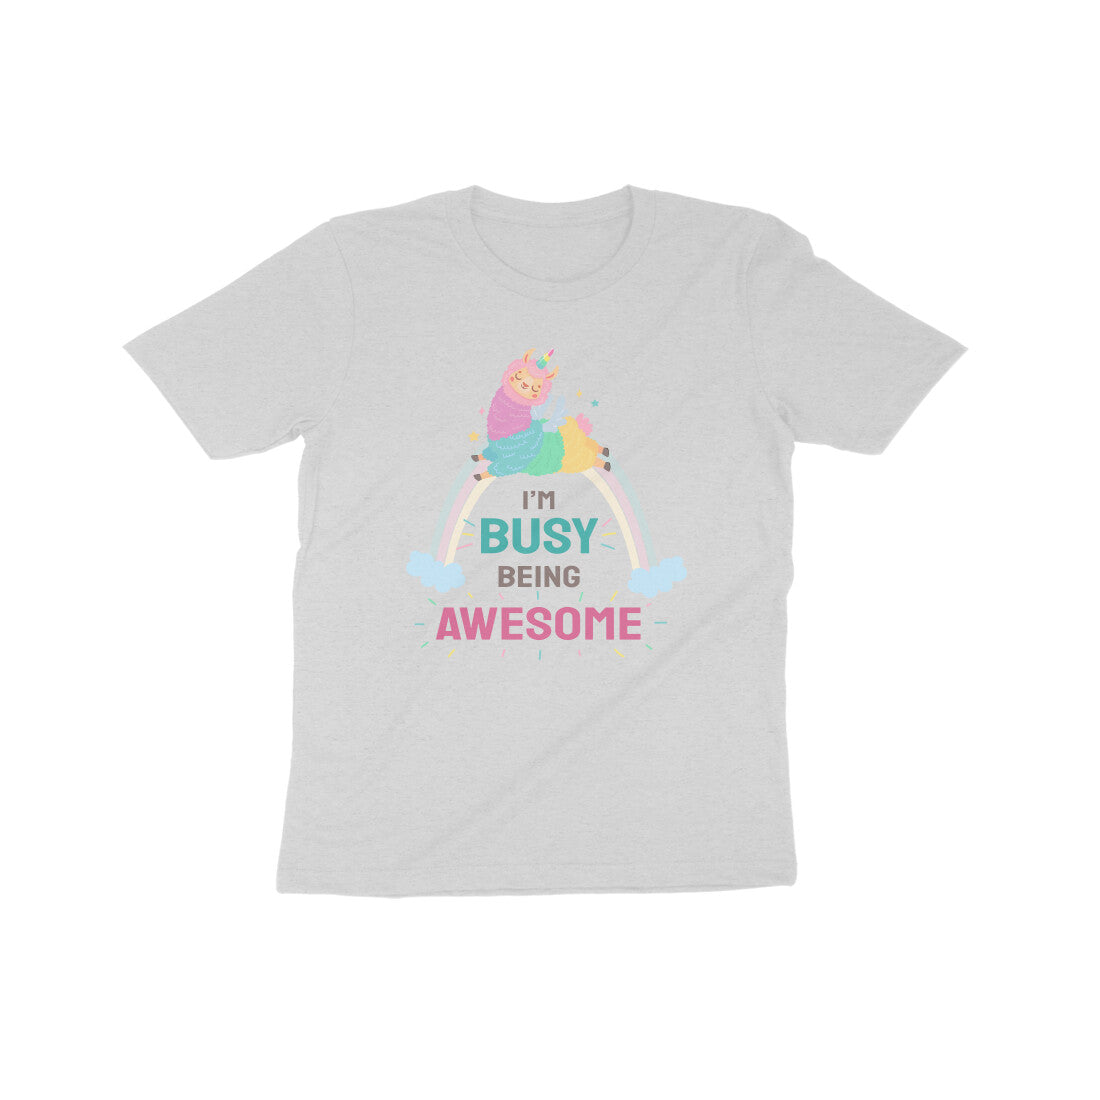 I am busy being Awesome Kids T-Shirt